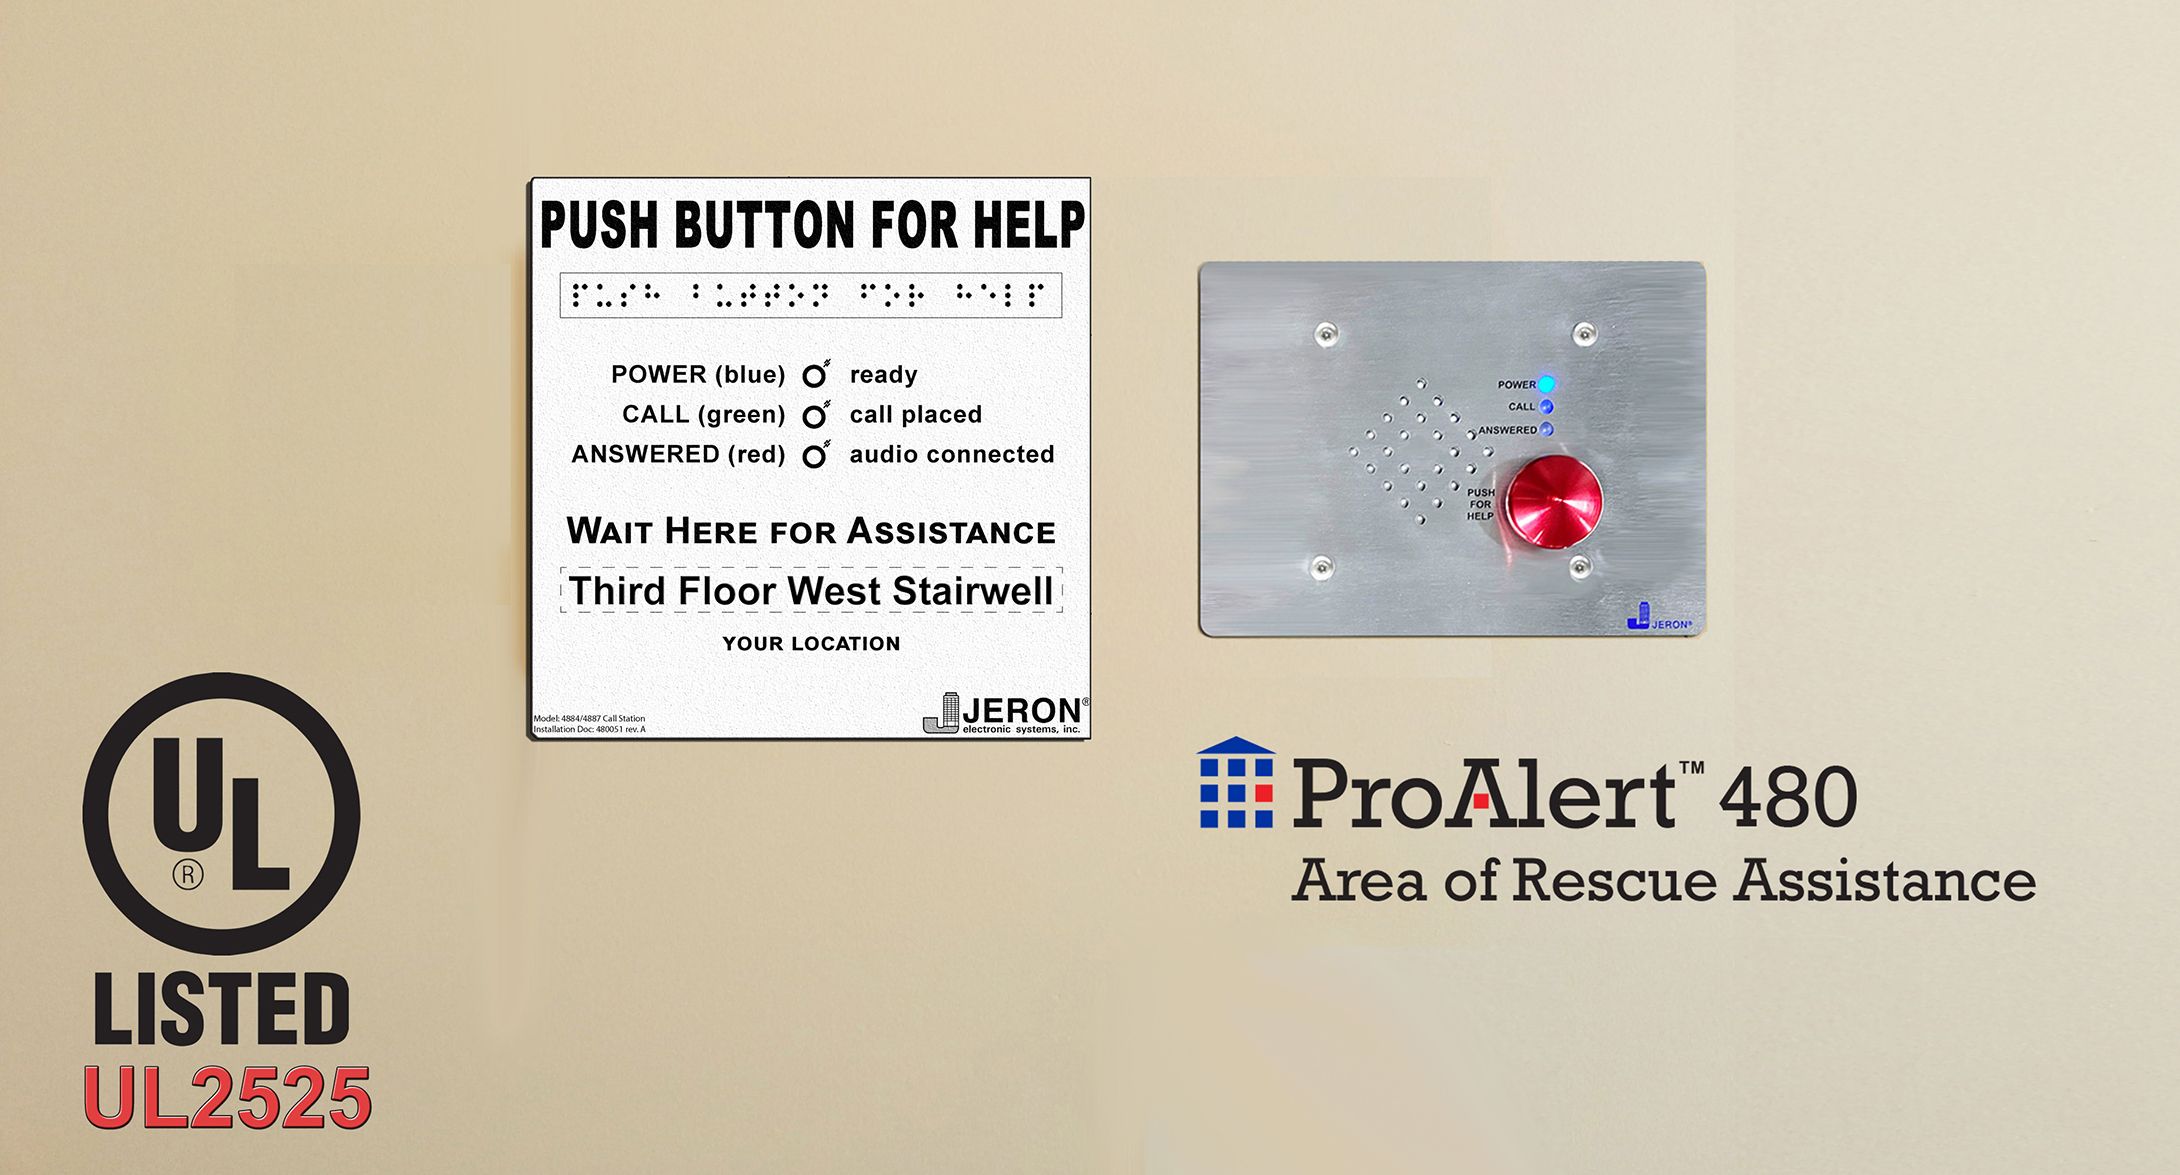 UL2525 Listed Pro-Alert Area of Rescue Assistance